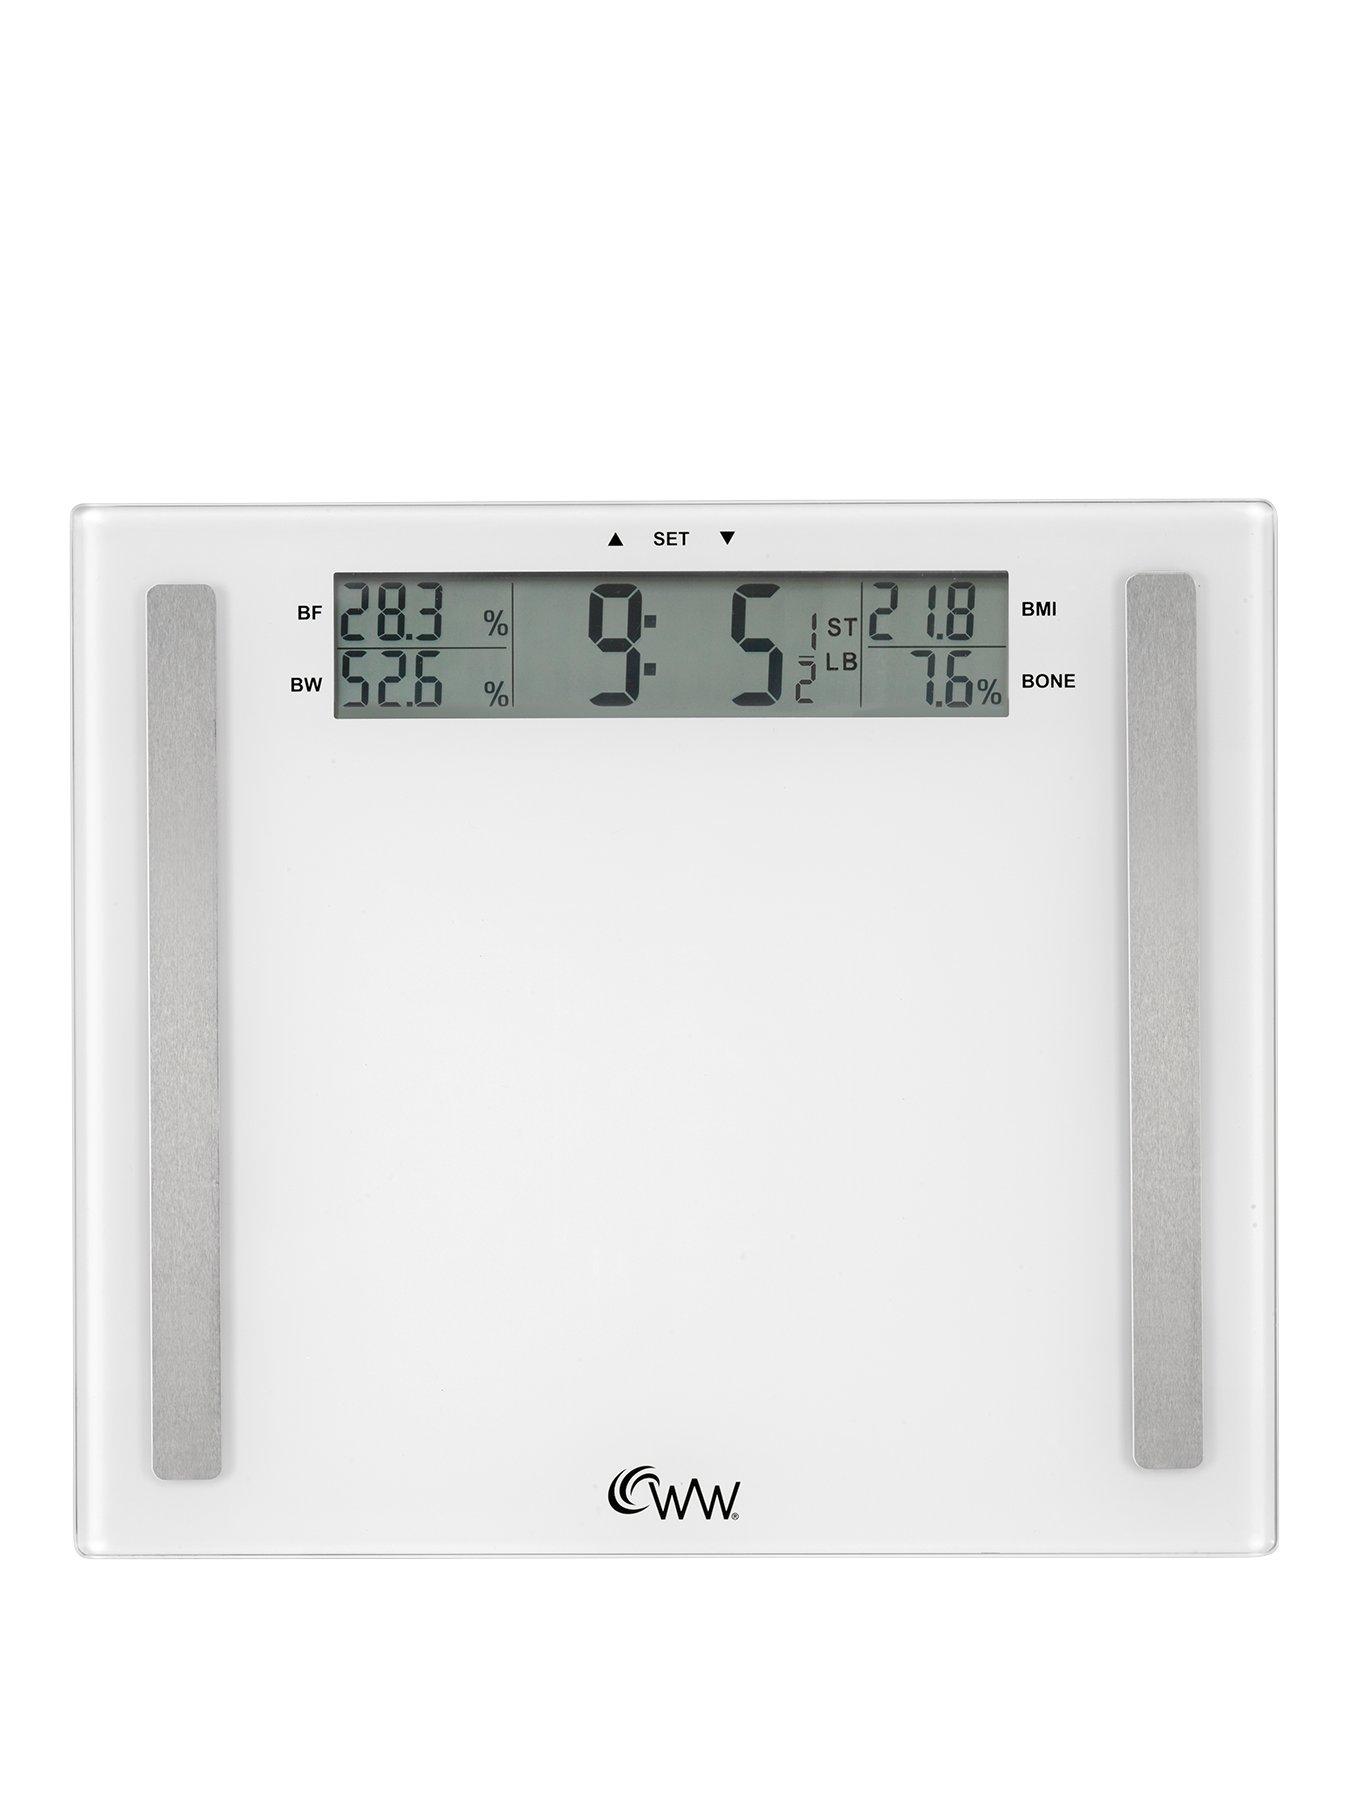 https://media.littlewoods.com/i/littlewoods/73GUQ_SQ1_0000000013_WHITE_SLf/weight-watchers-weightwatchers-ultimate-accuracy-easy-read-glass-scale.jpg?$180x240_retinamobilex2$&$roundel_littlewoods$&p1_img=lw_sale_2018